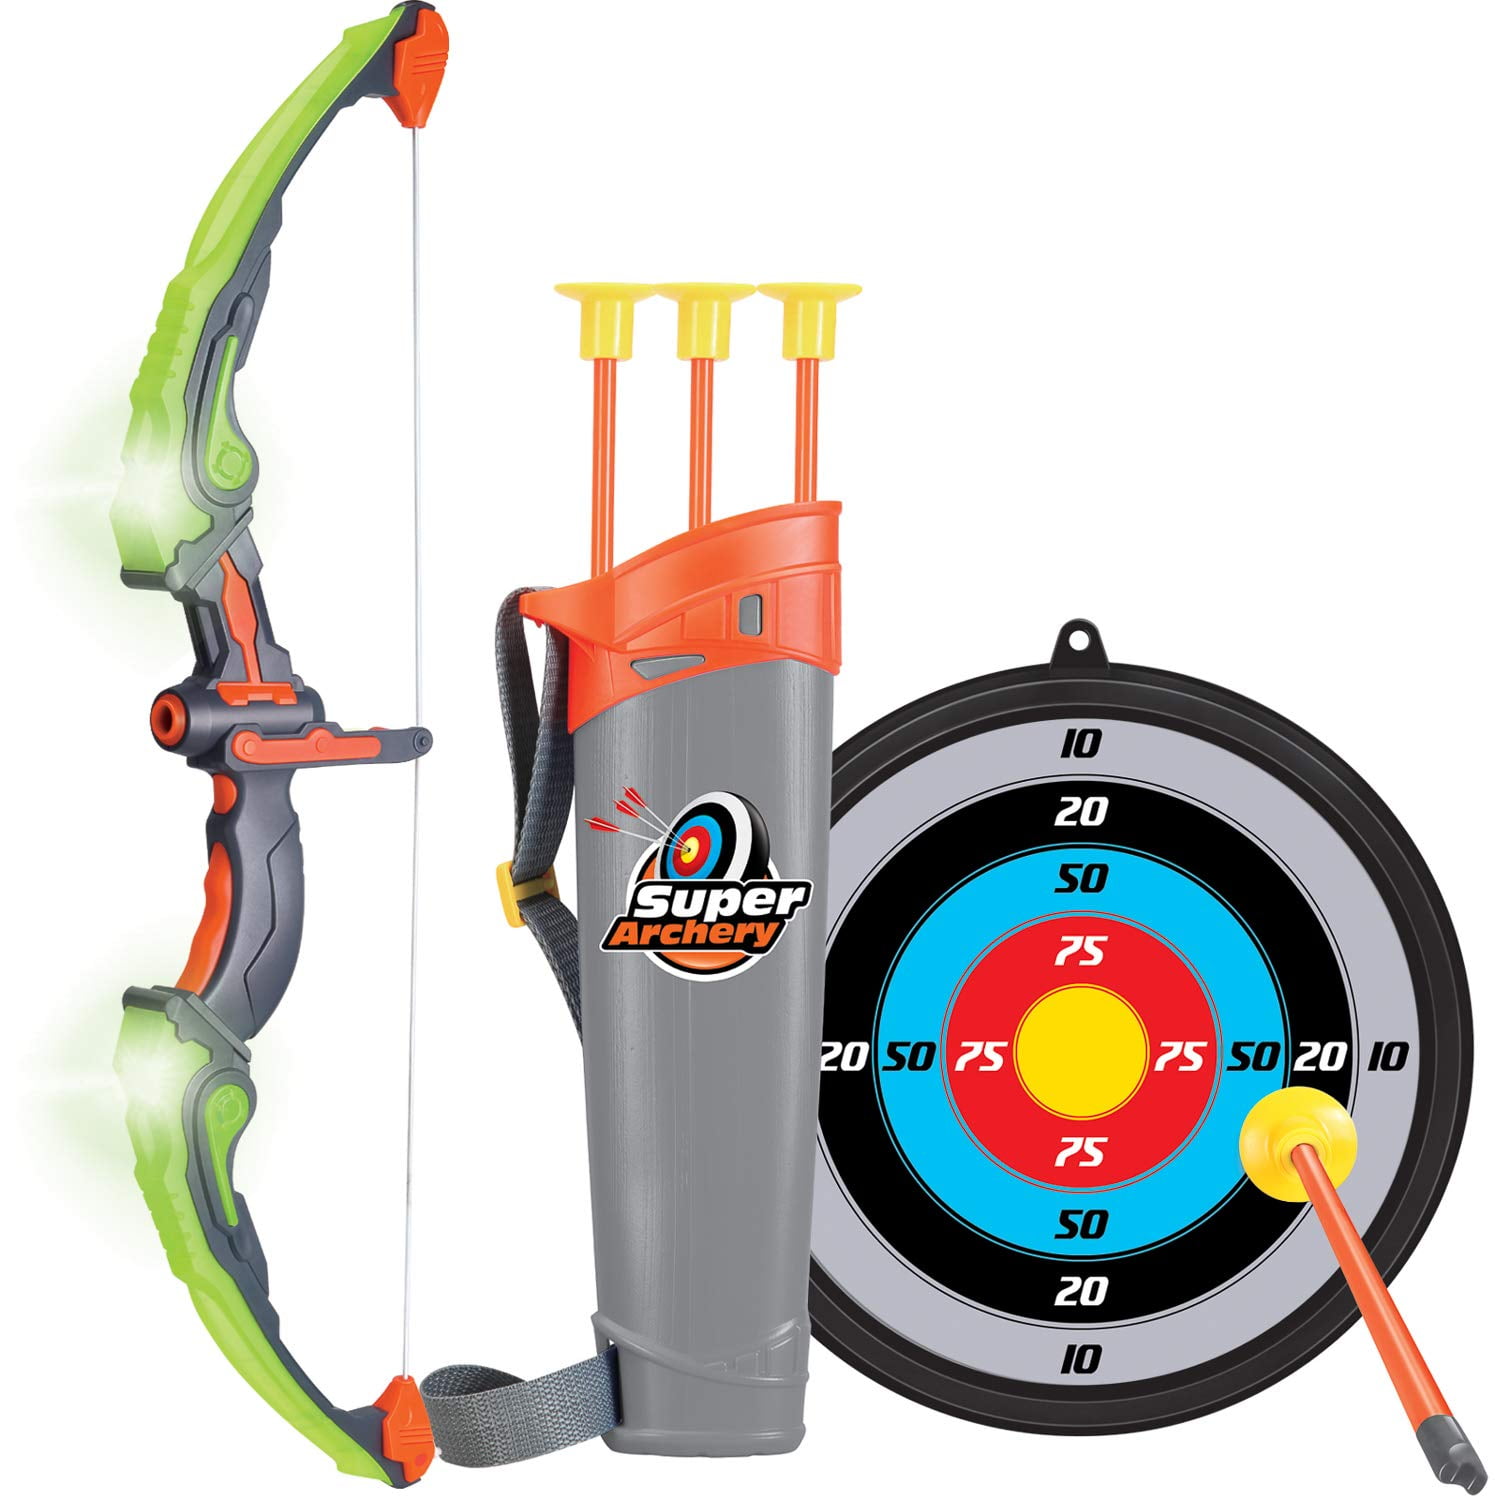 Click N' Play Light Up Toy Bow and Arrow Archery Set | Outside Kids Toy for  Bow and Arrow Hunting Play | Including Bow, 3 Suction Cups Kids Arrows,  Target, and Quiver 